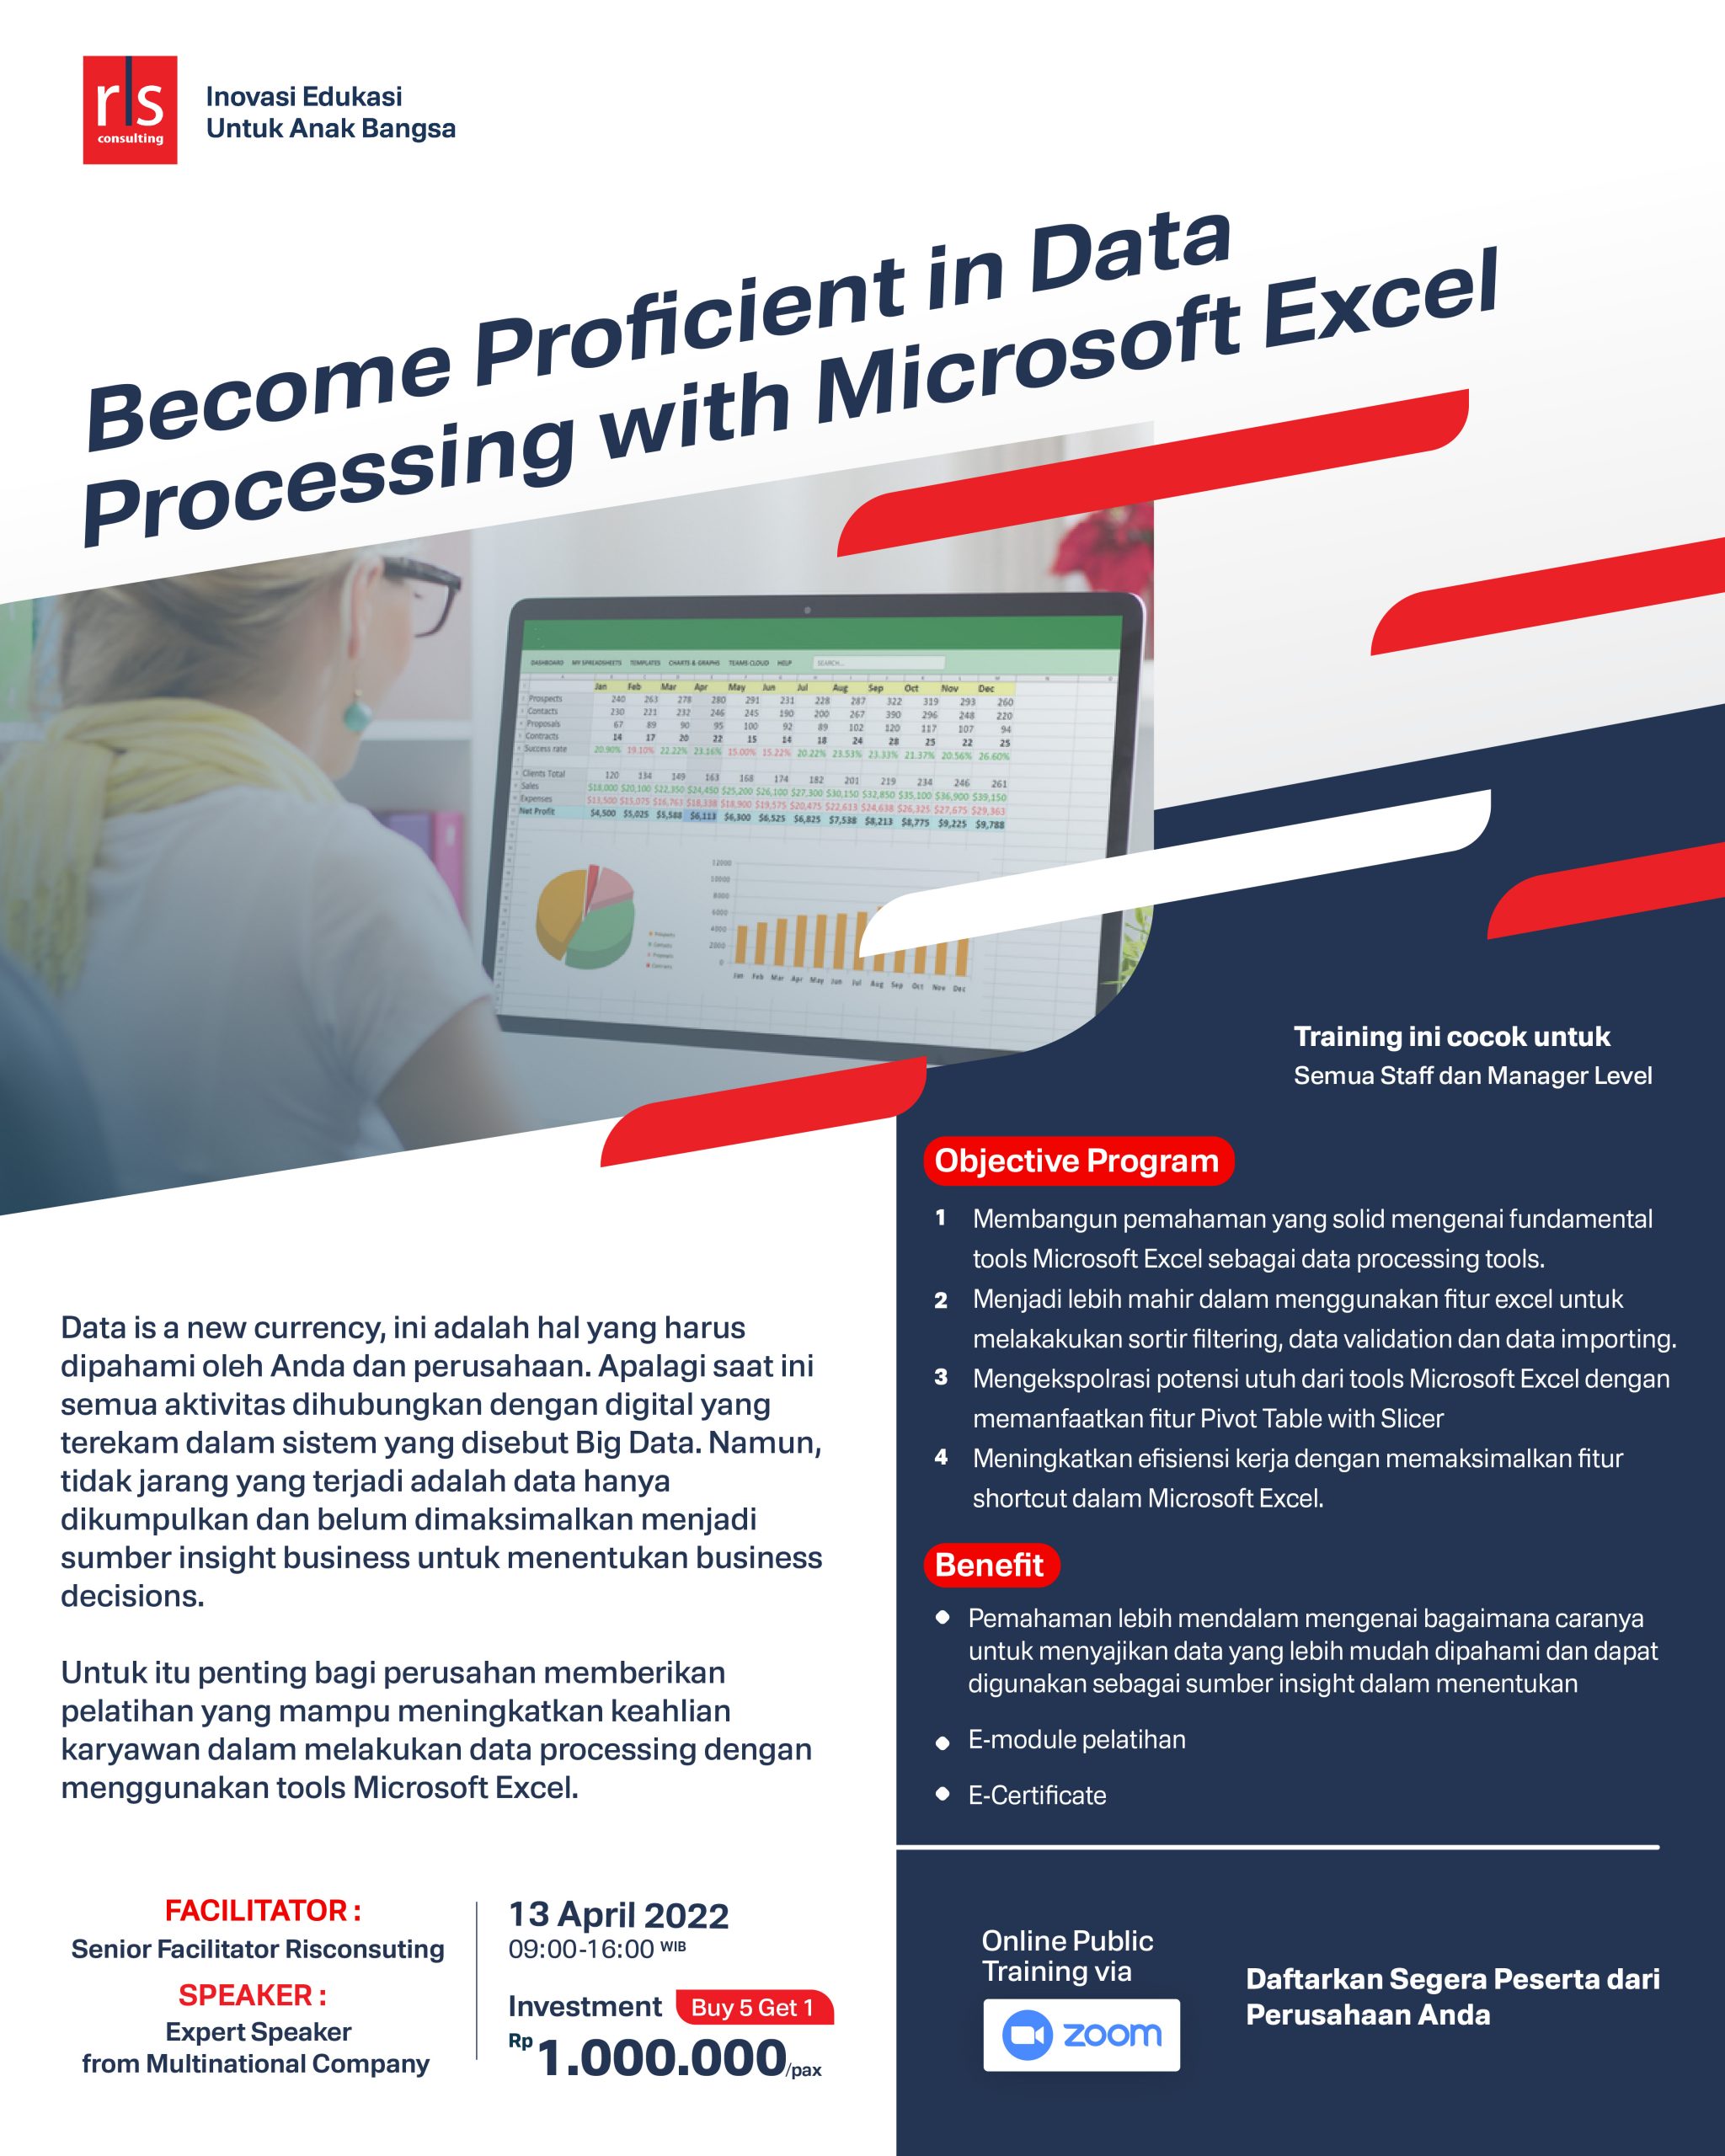 PP__Become Proficient in Data Processing